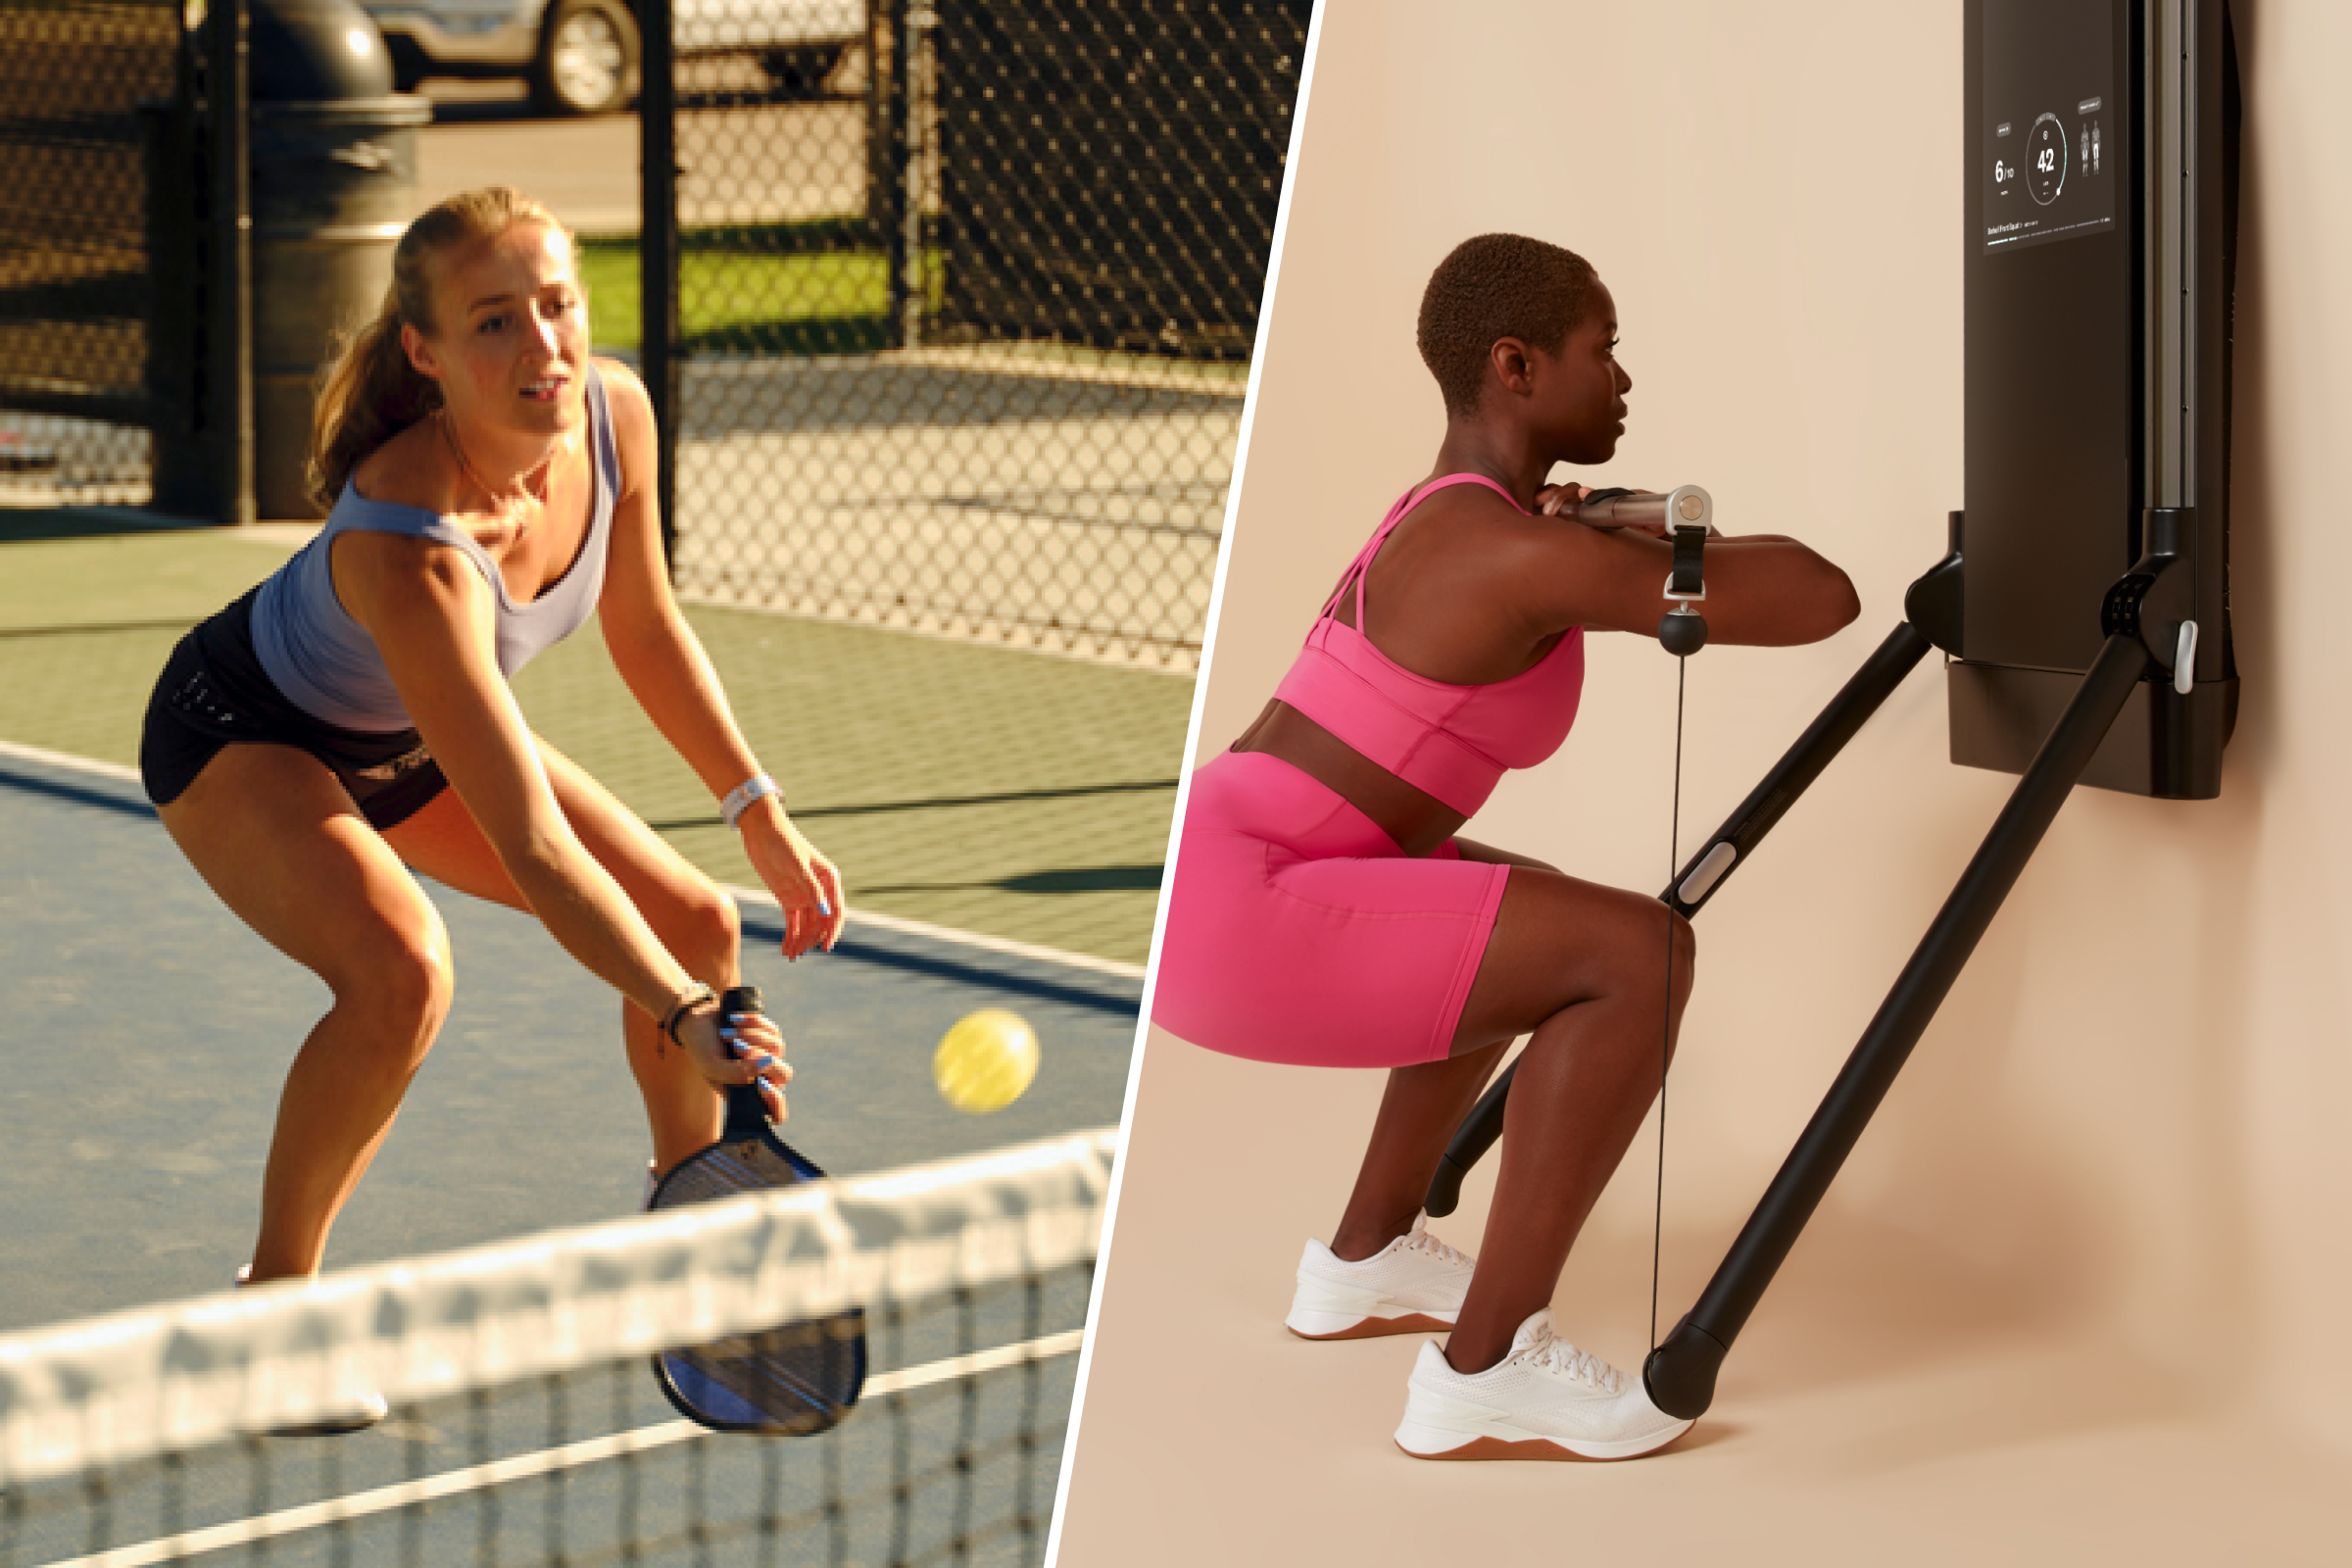 Different Ways to Increase Grip Strength & Improve Your Tennis Swing